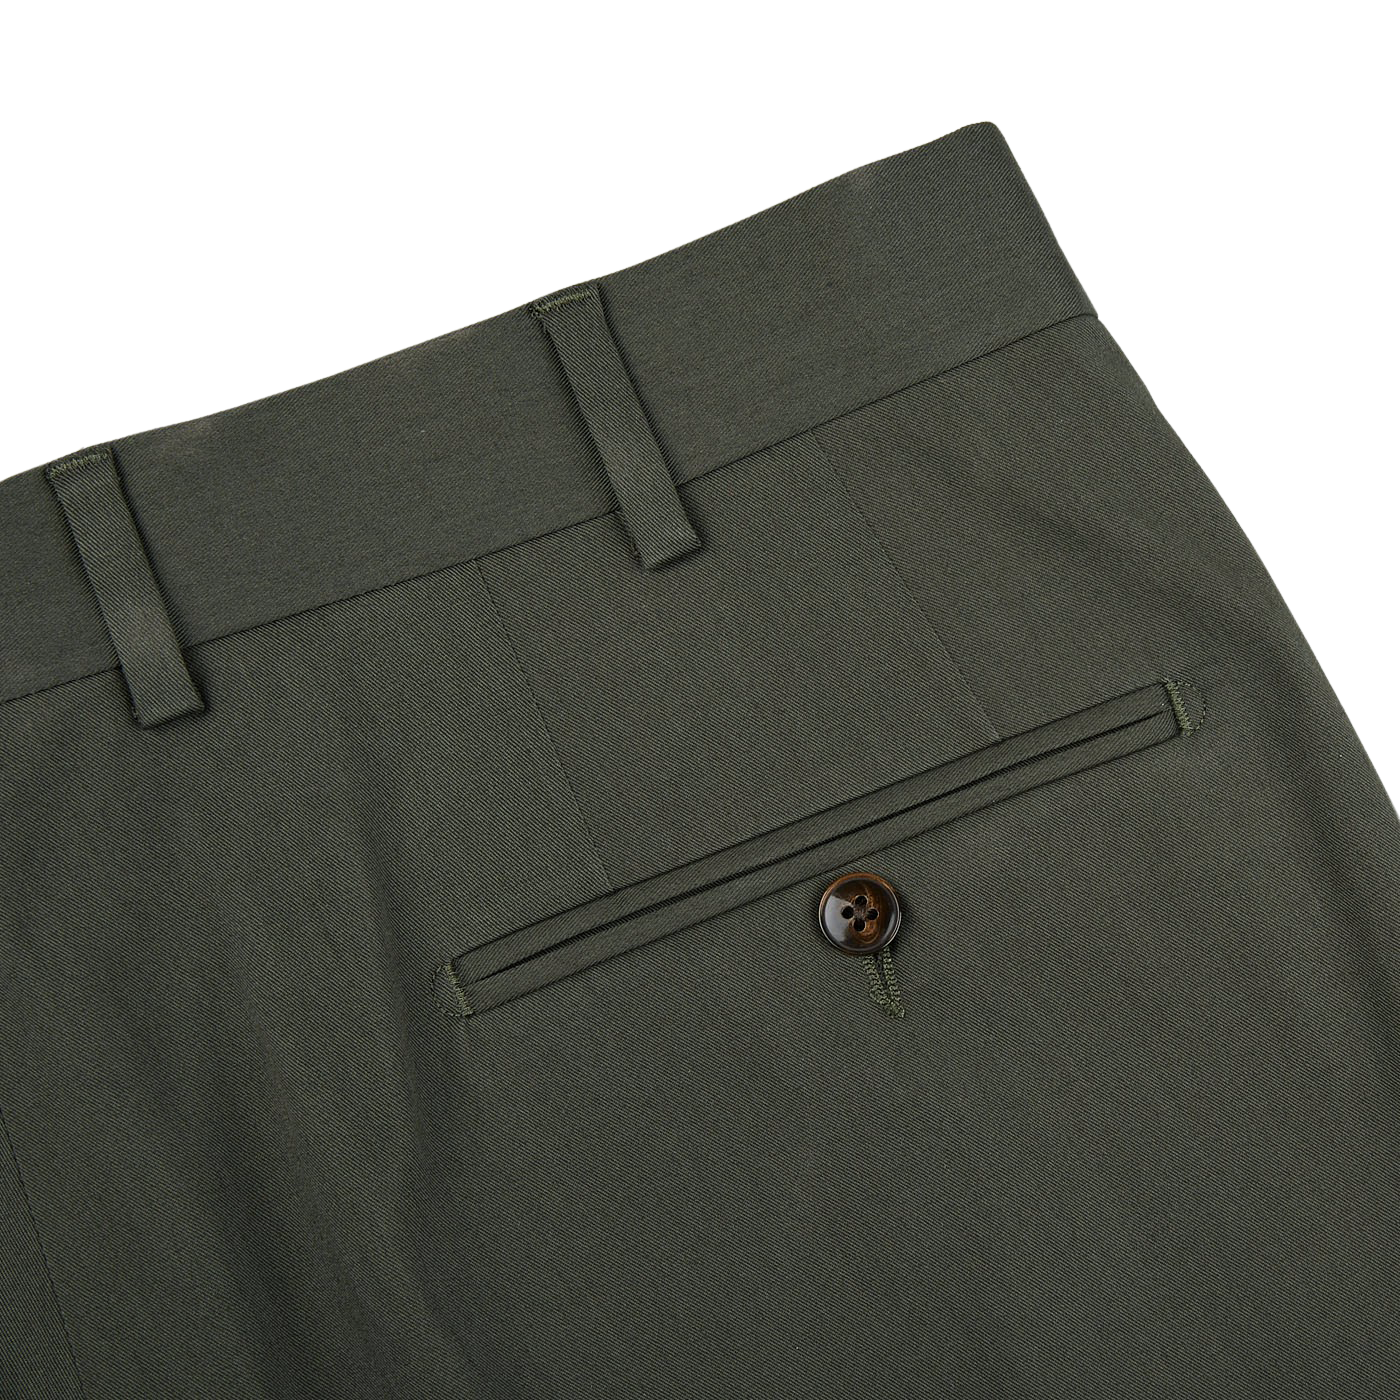 A pair of dark green Luigi Bianchi Dark Green Cotton Twill Flat Front Trousers with a button on the side.